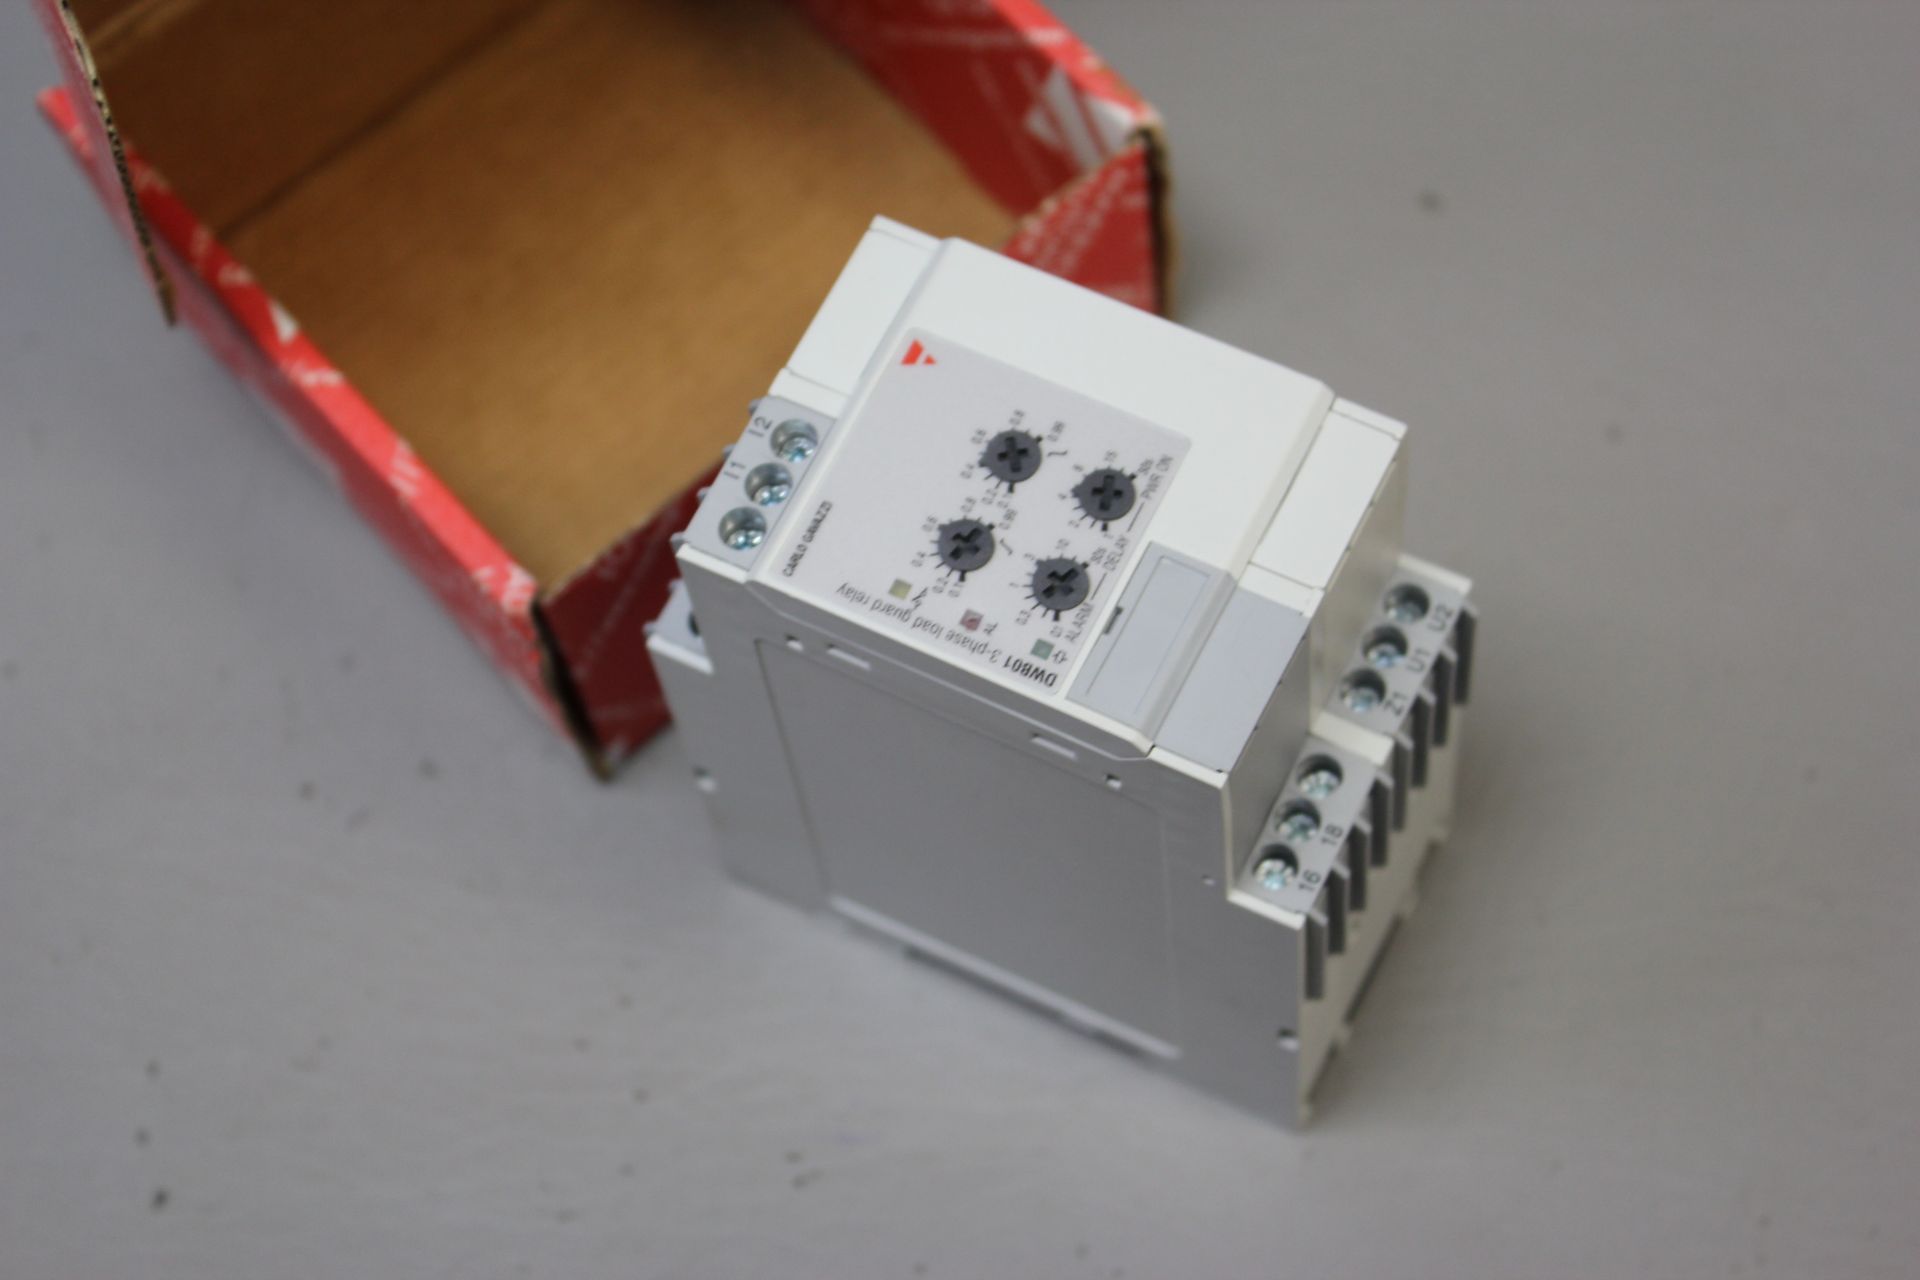 NEW CARLO GAVAZZI 3-PHASE LOAD GUARD RELAY - Image 2 of 4